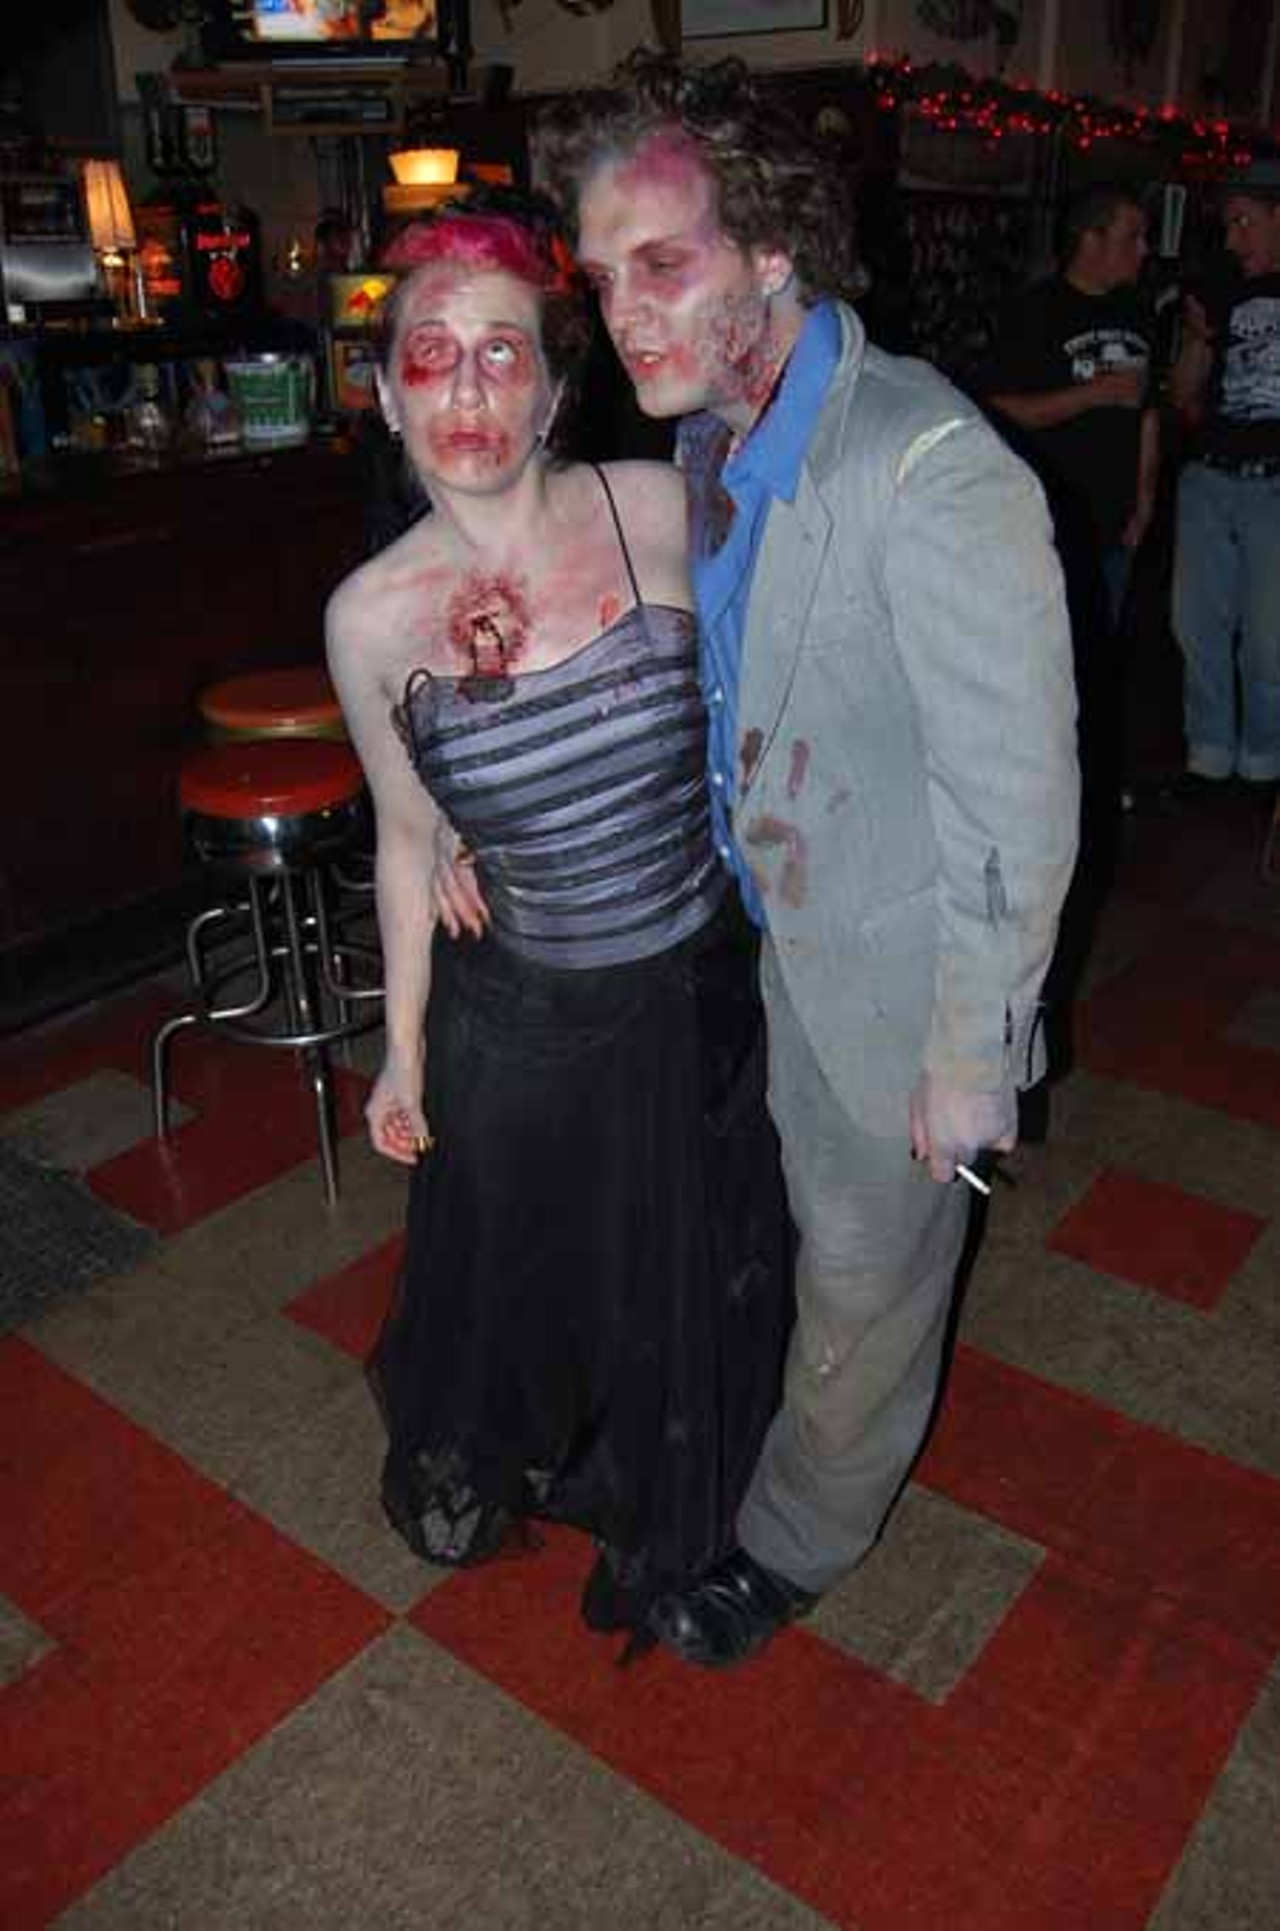 Zombie prommers at the Way Out Club.